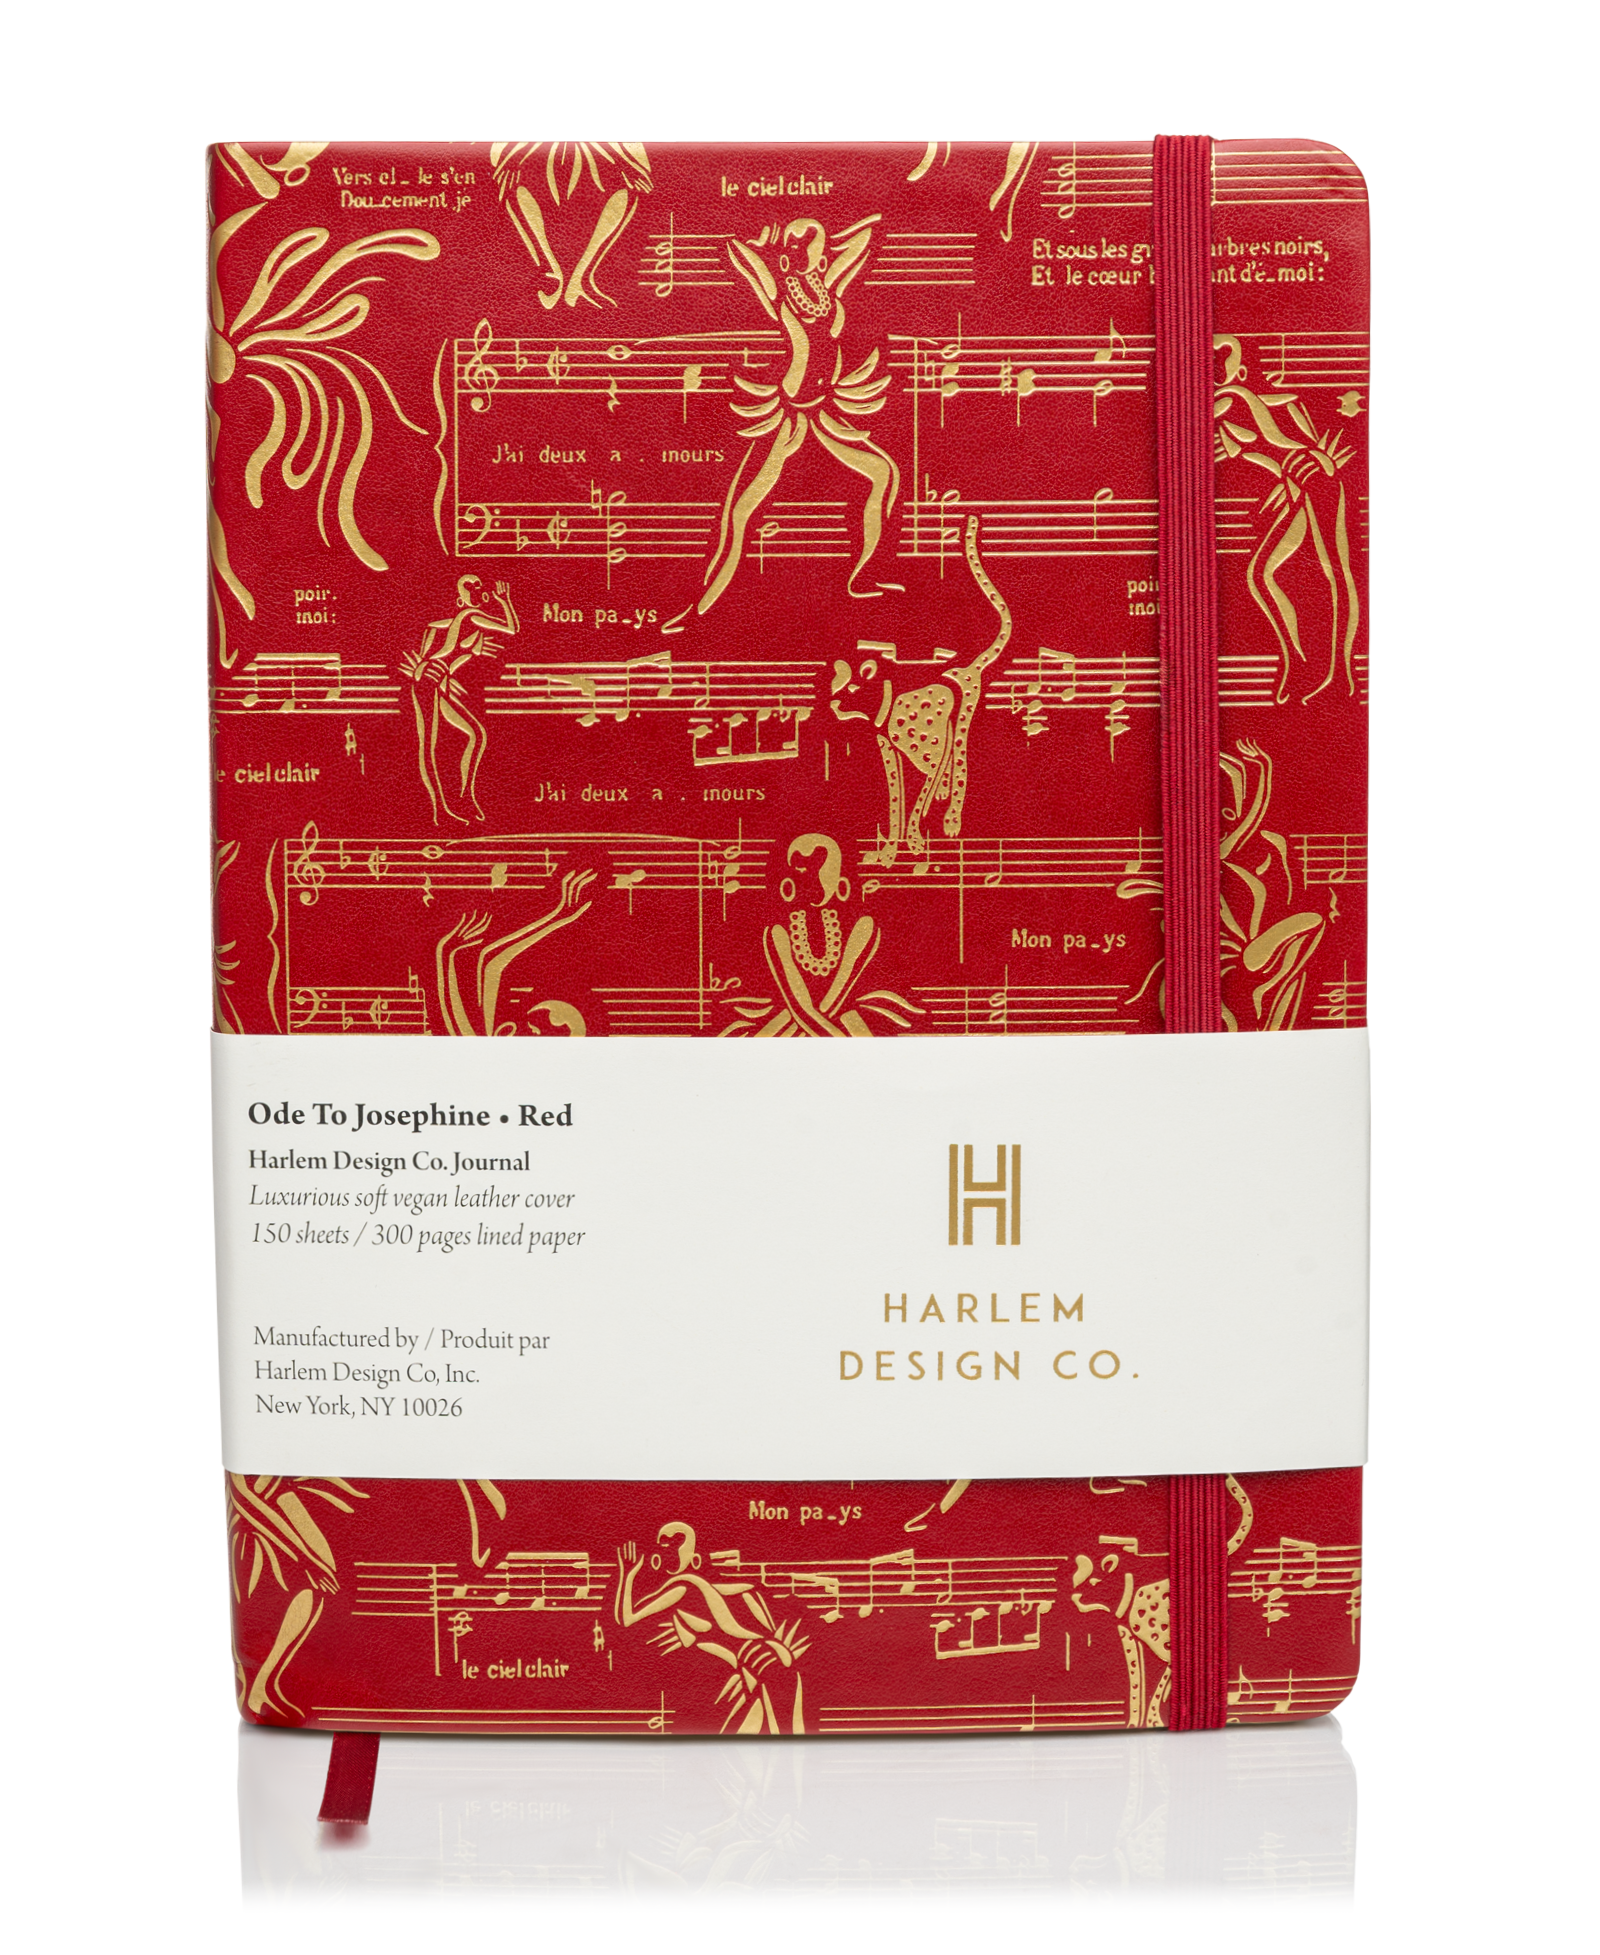 This is a product image of the Harlem Design Co Josephine journal in Red and Gold.  This image has the product information sleeve on the outside.